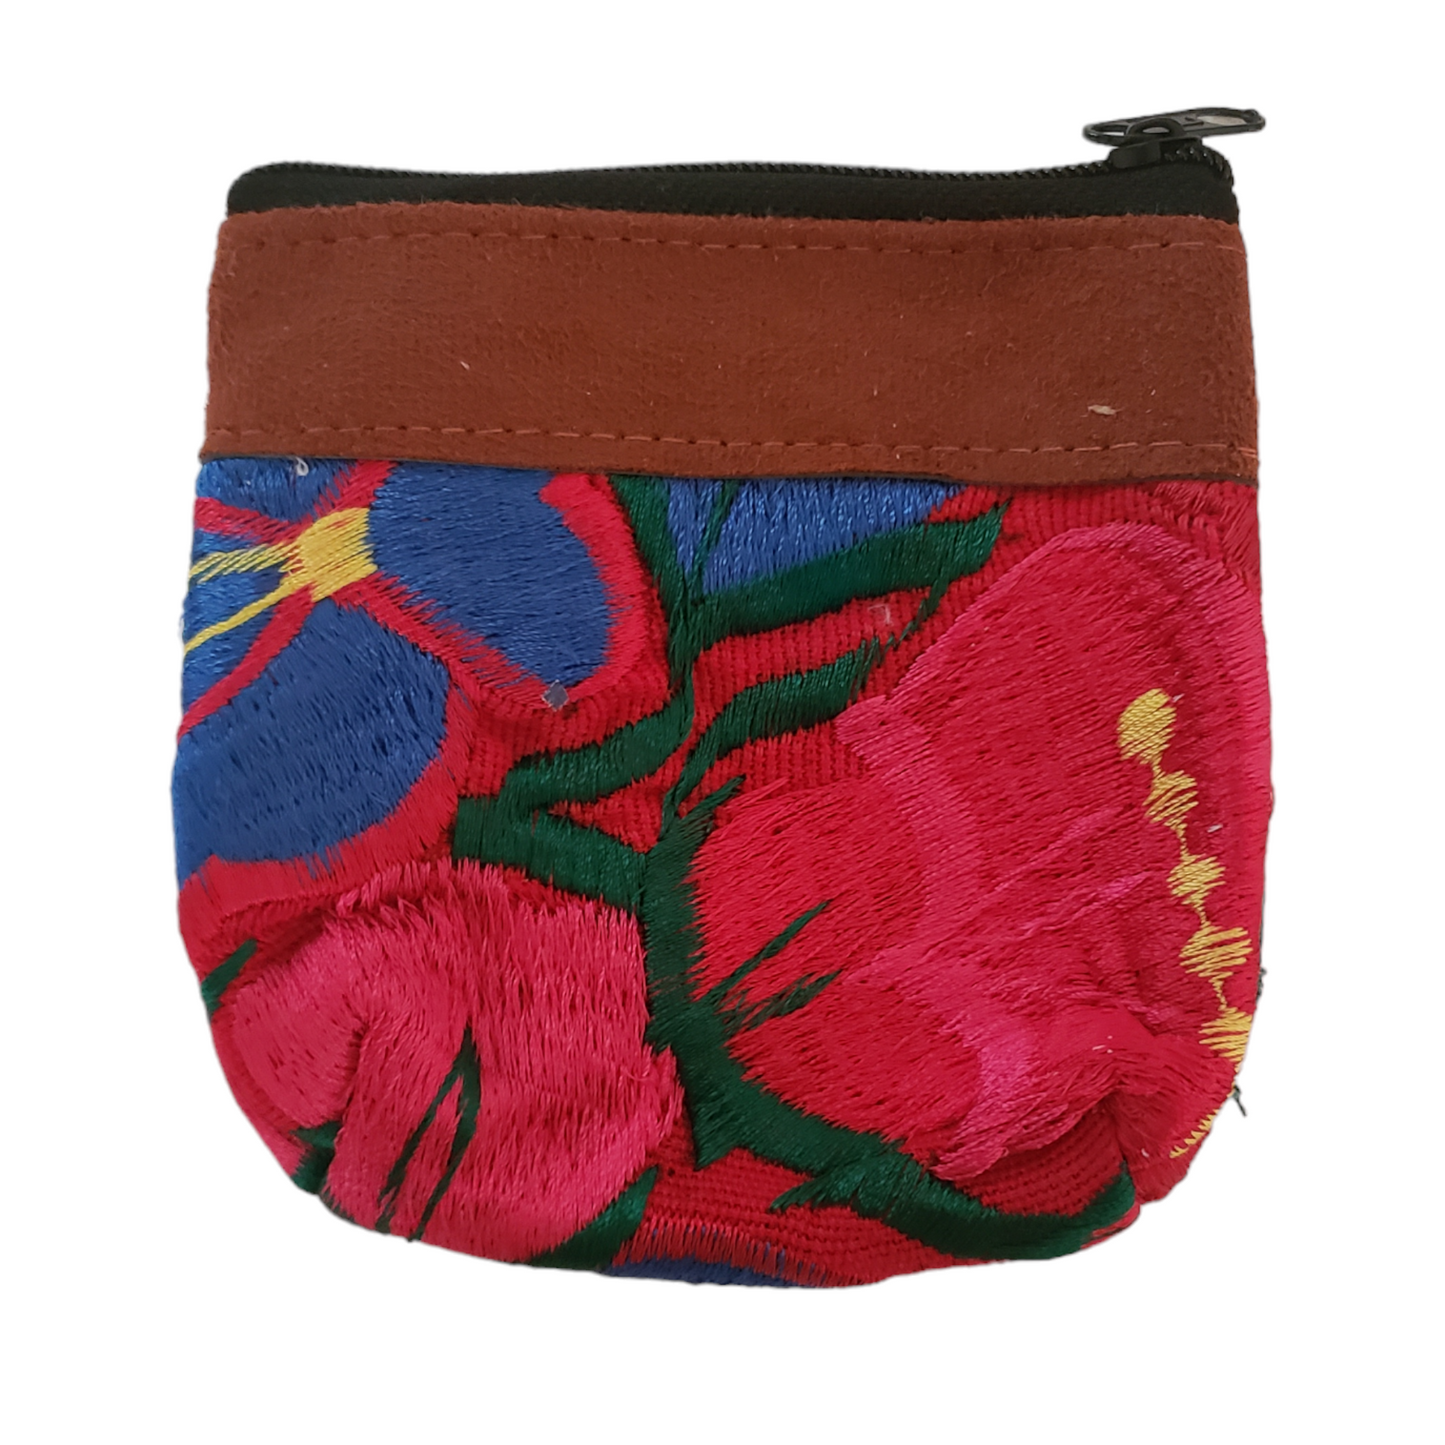 Embroidered Mexican Coin Purse from Oaxaca Mexico